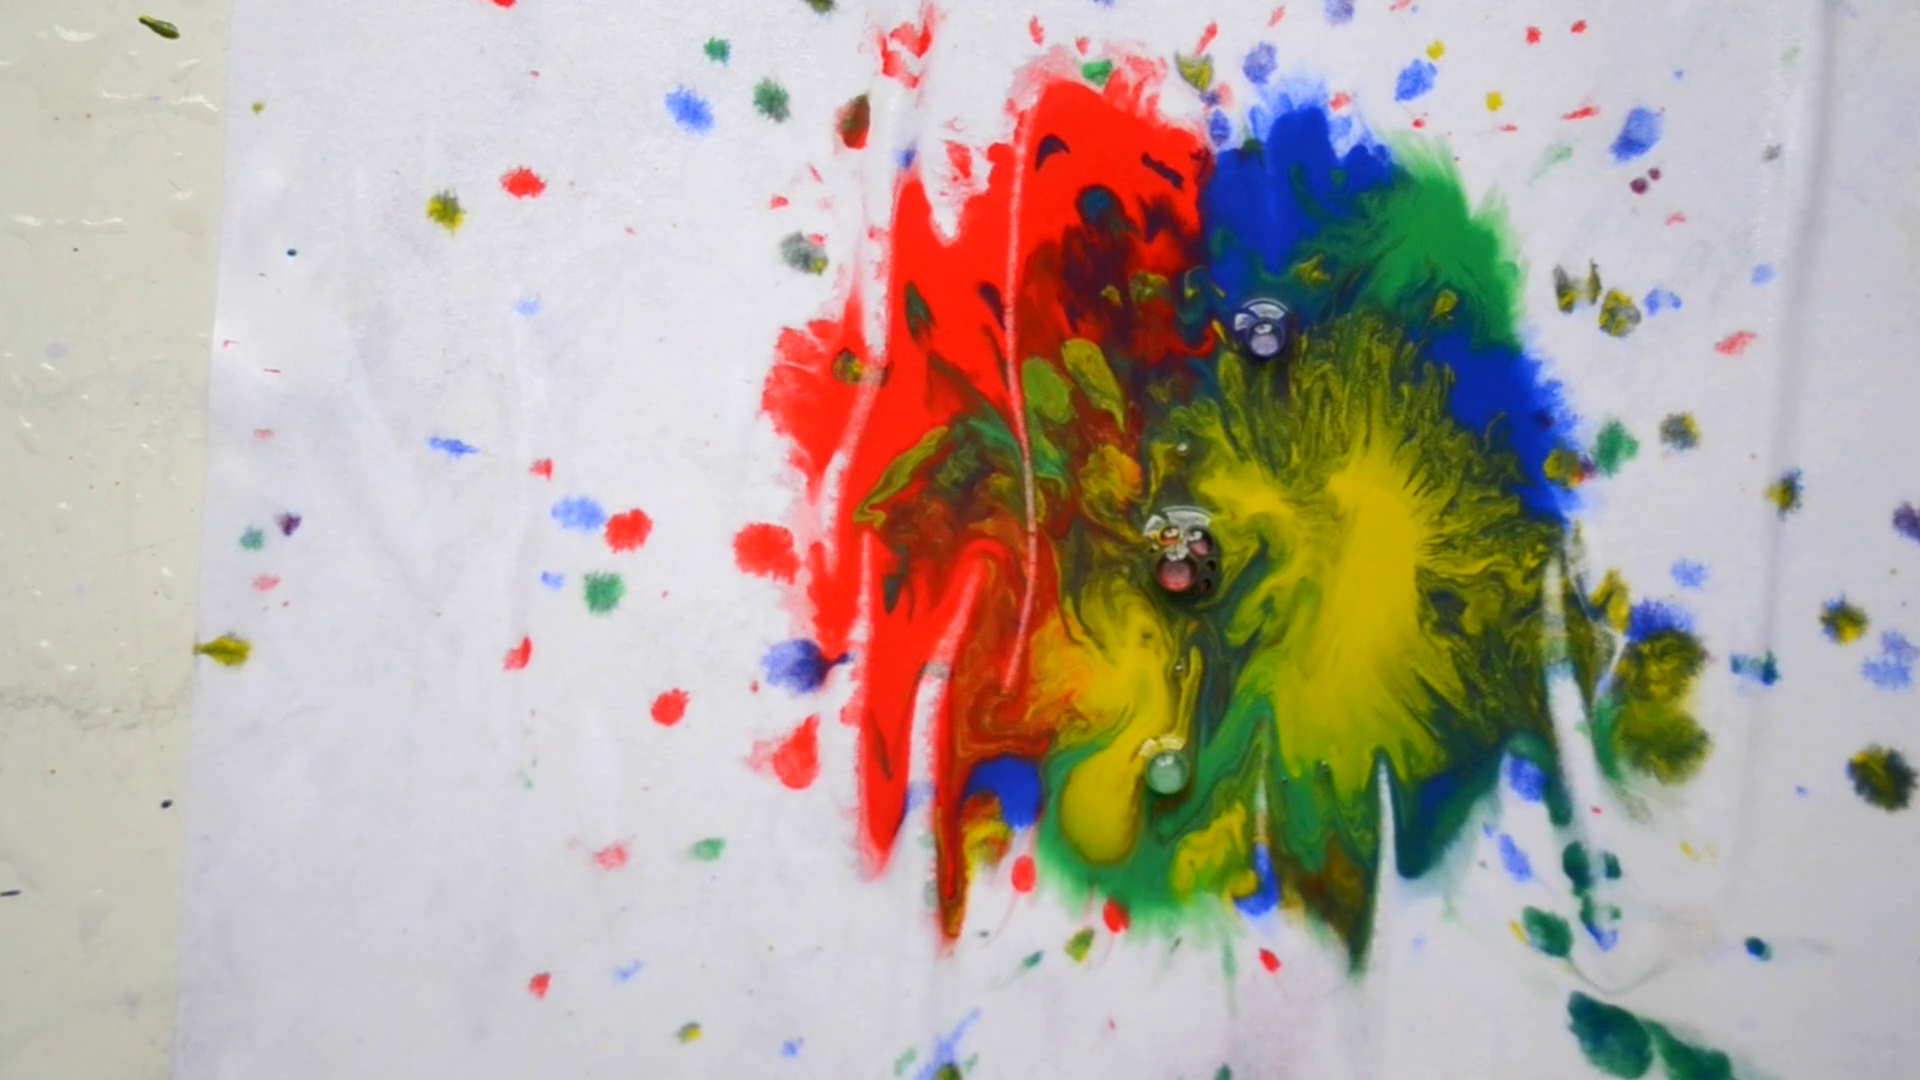 HD 1080 Drops of paint of different red, blue, green, yellow colors ...